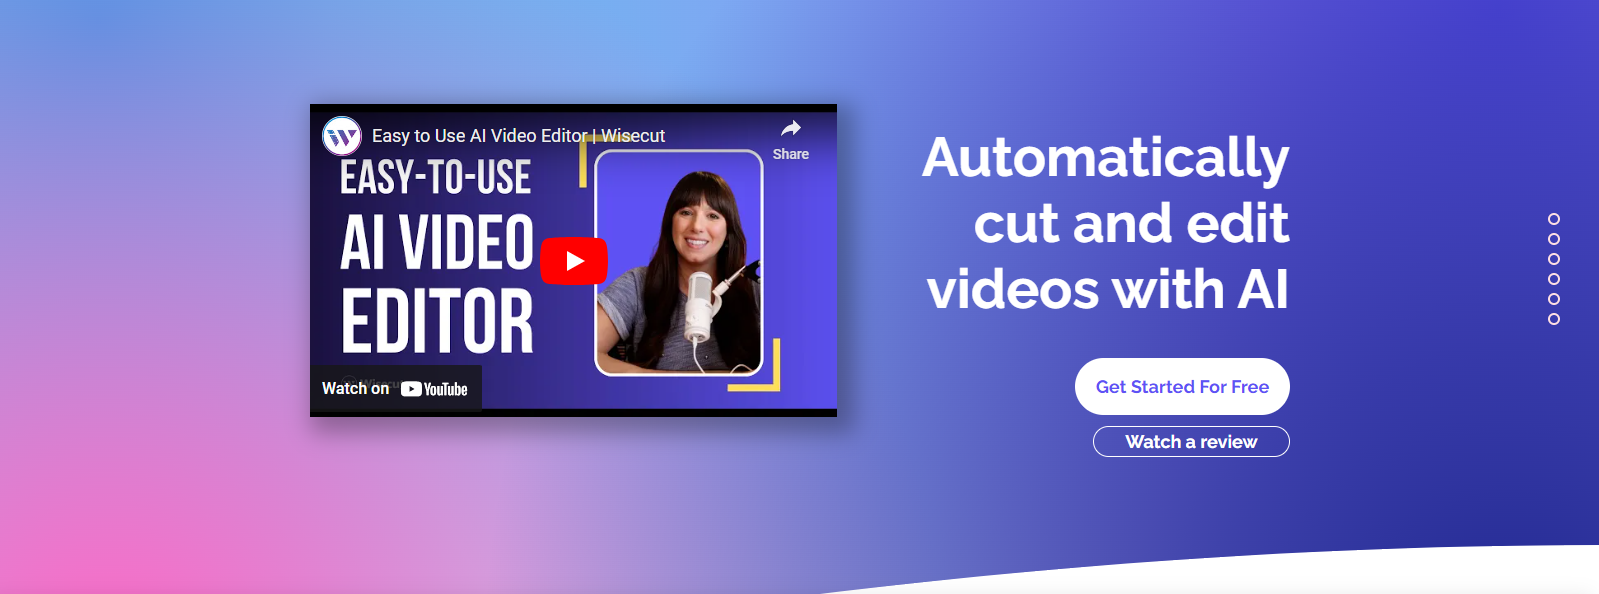 Wisecut Automatic Video Editor